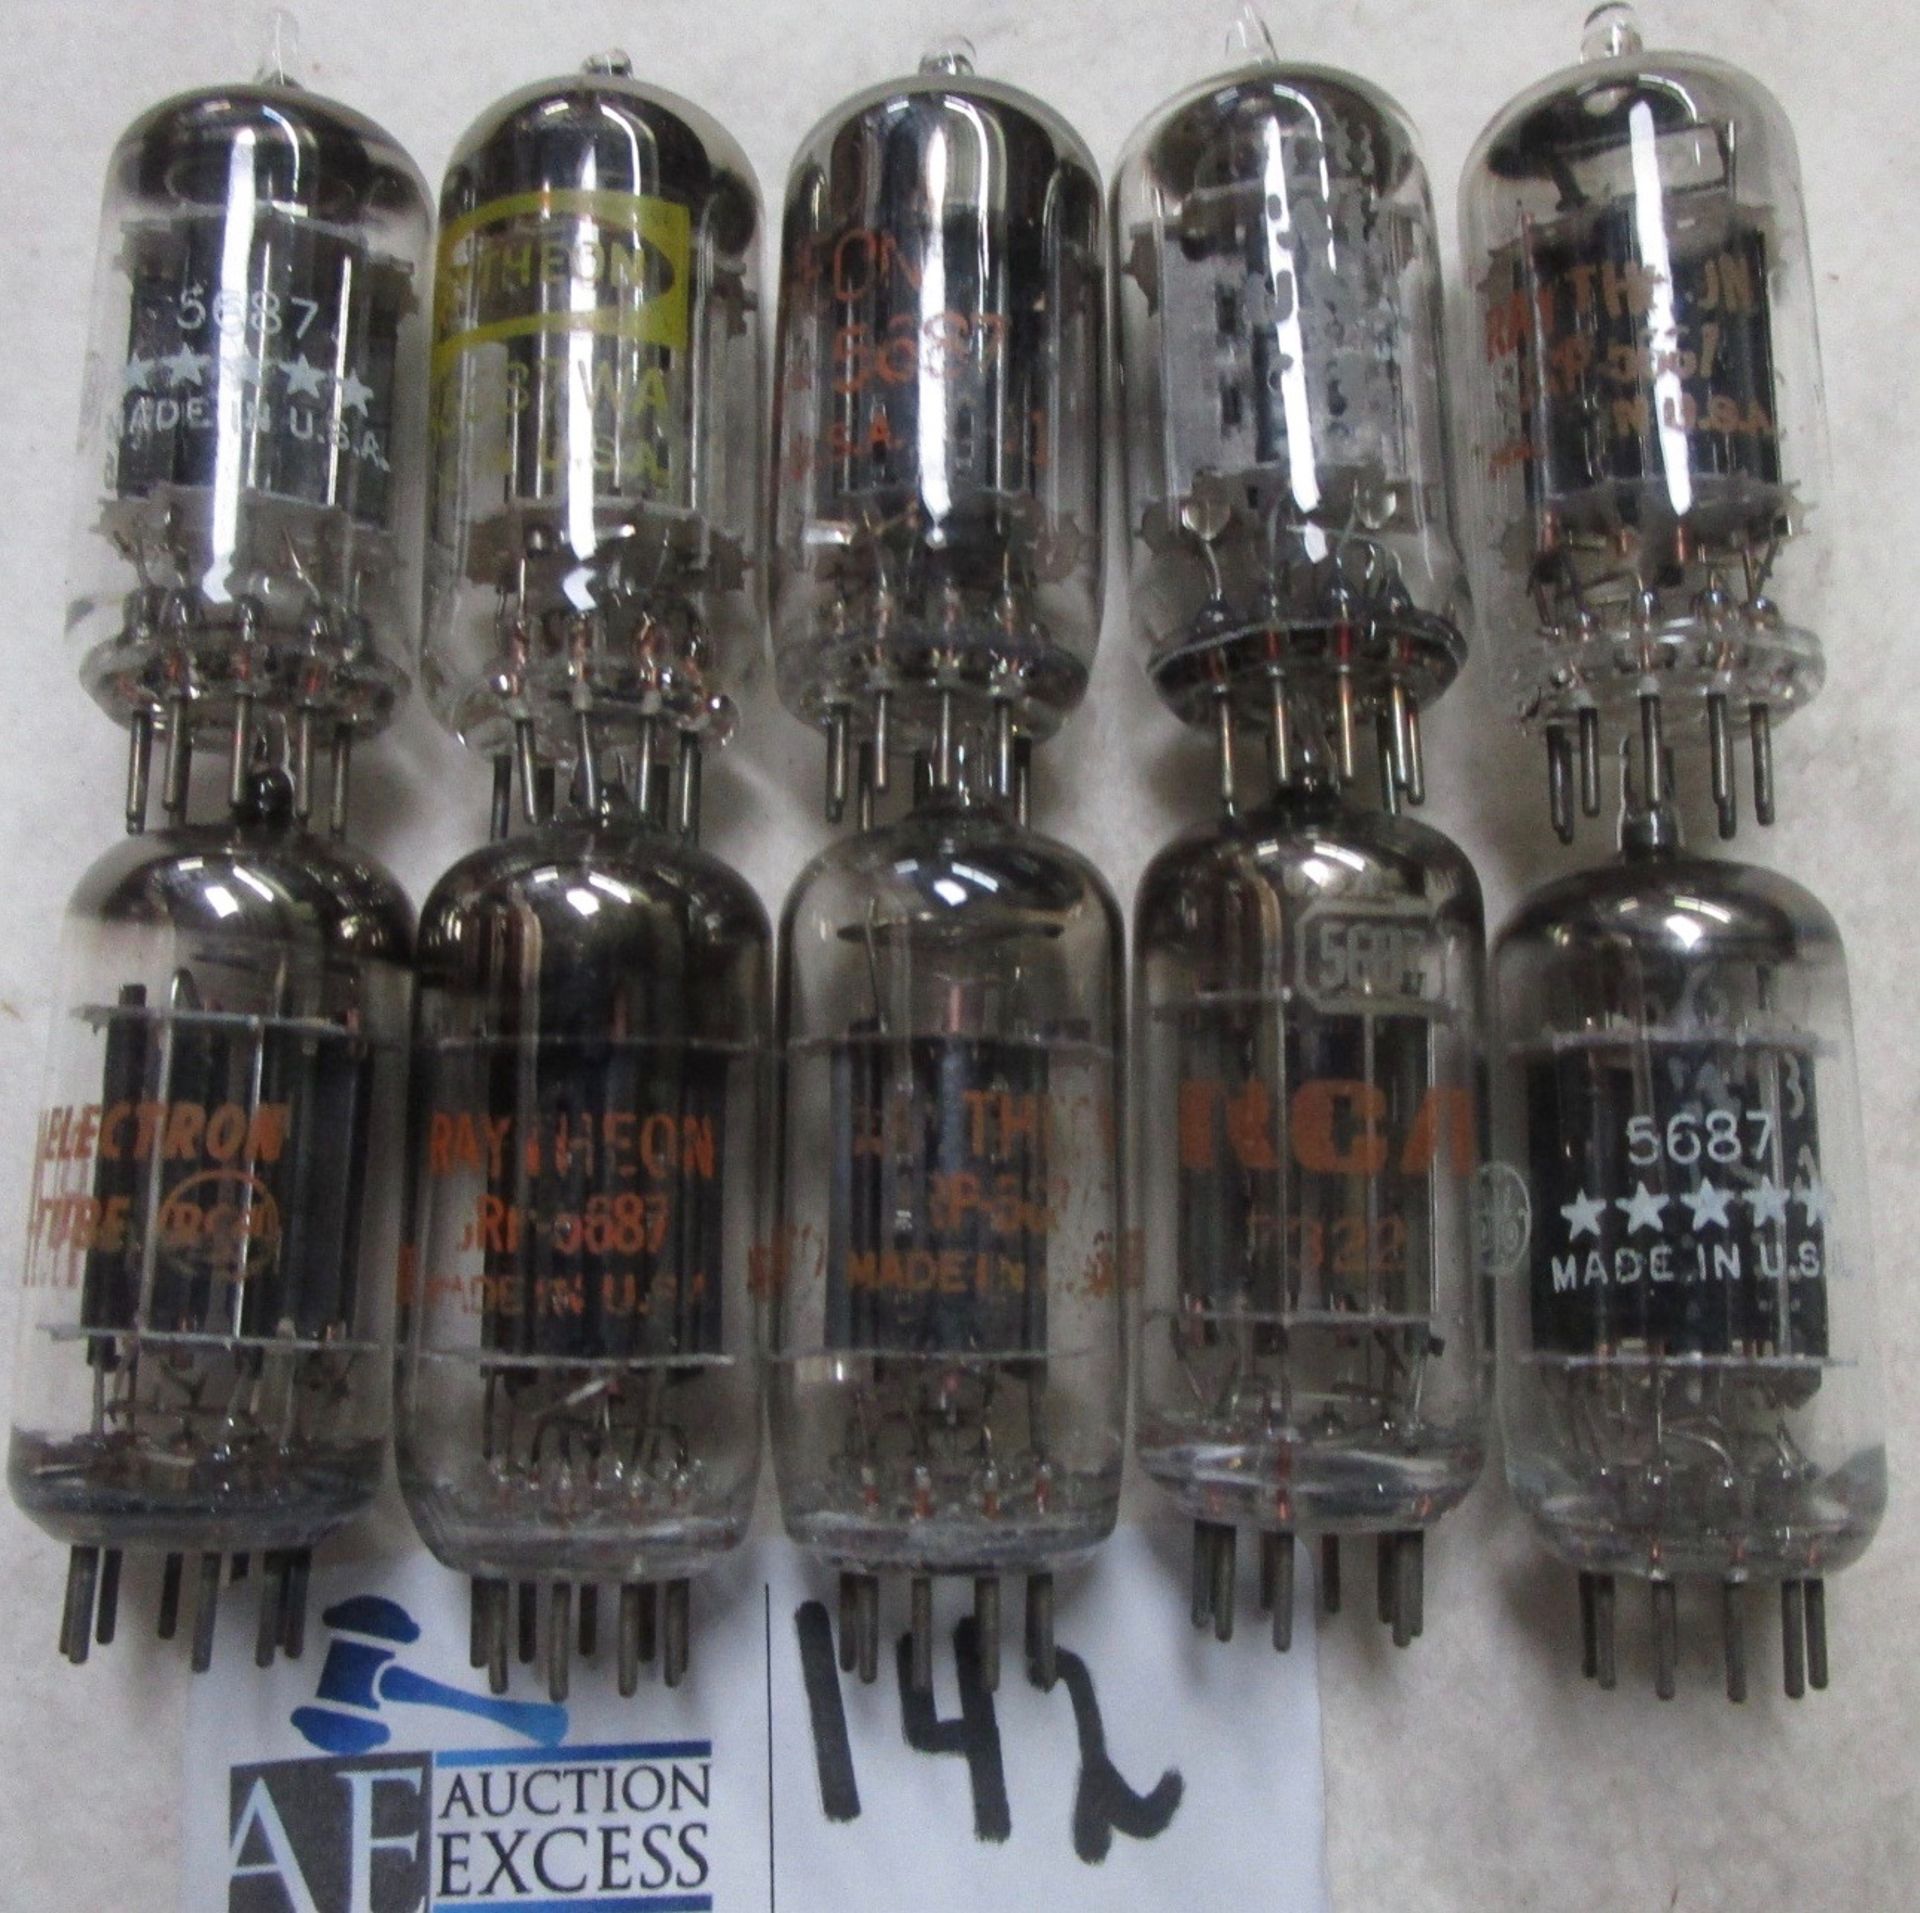 LOT OF 10 5687 TUBES